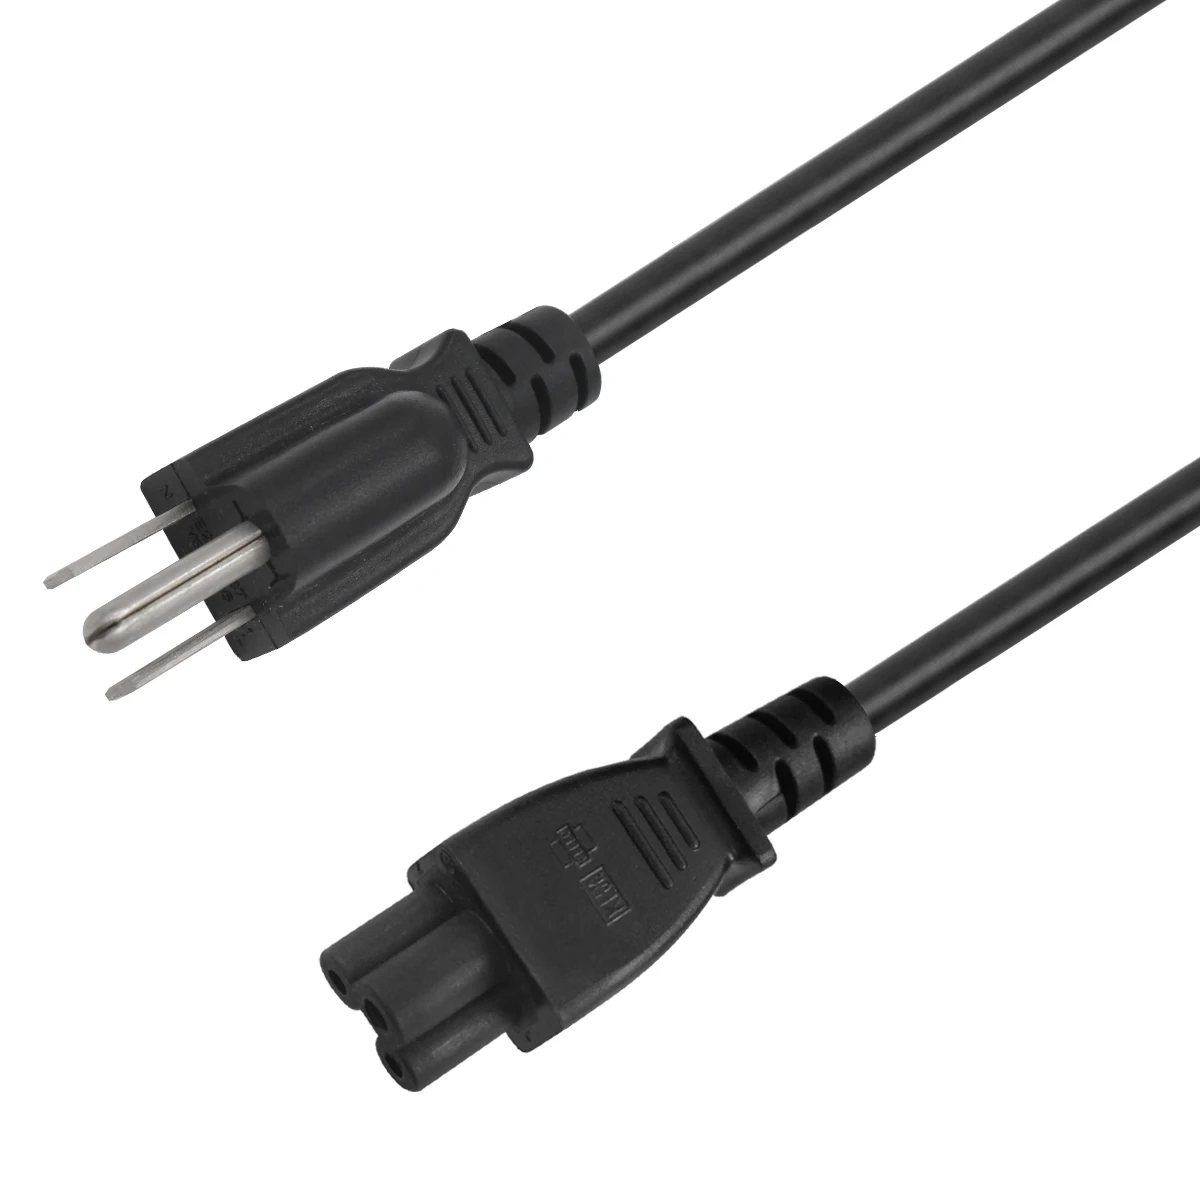 IEC C7 to US 2 Prong AC Power Cord Figure 8 Power Cable 15